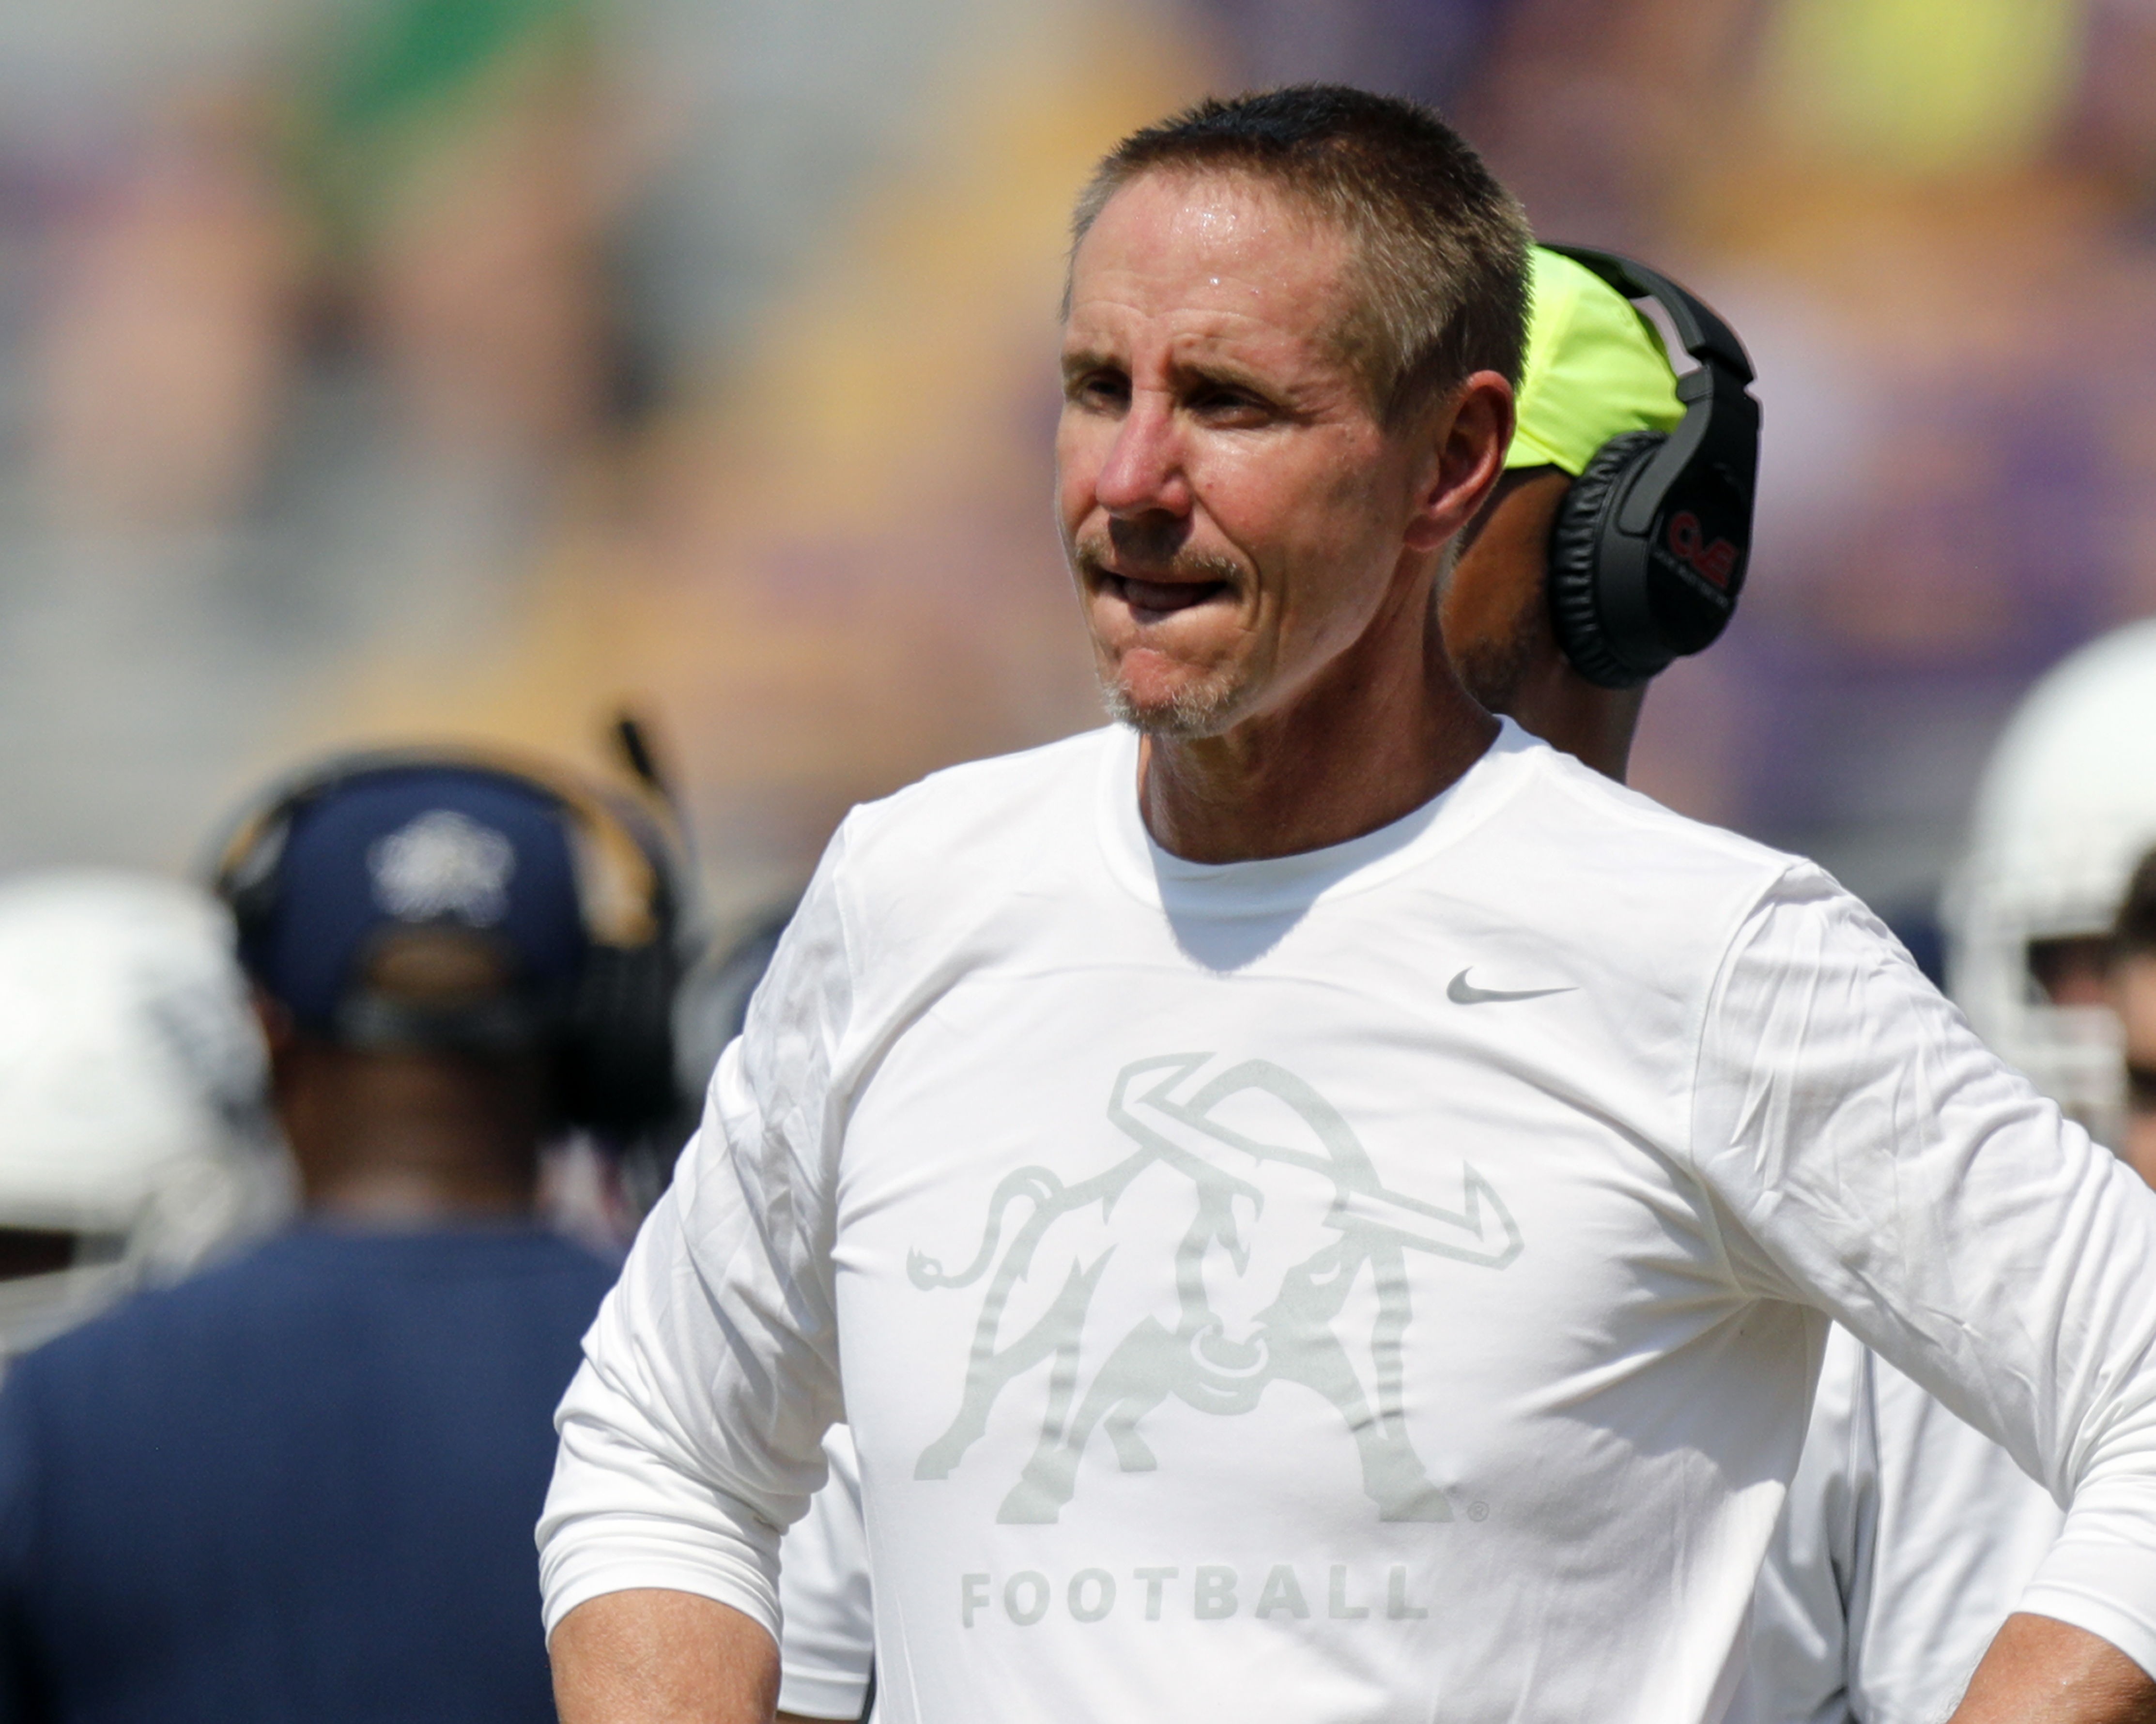 Utah State Football Coach Just Made a Big Mistake With His Opt-Out Comments